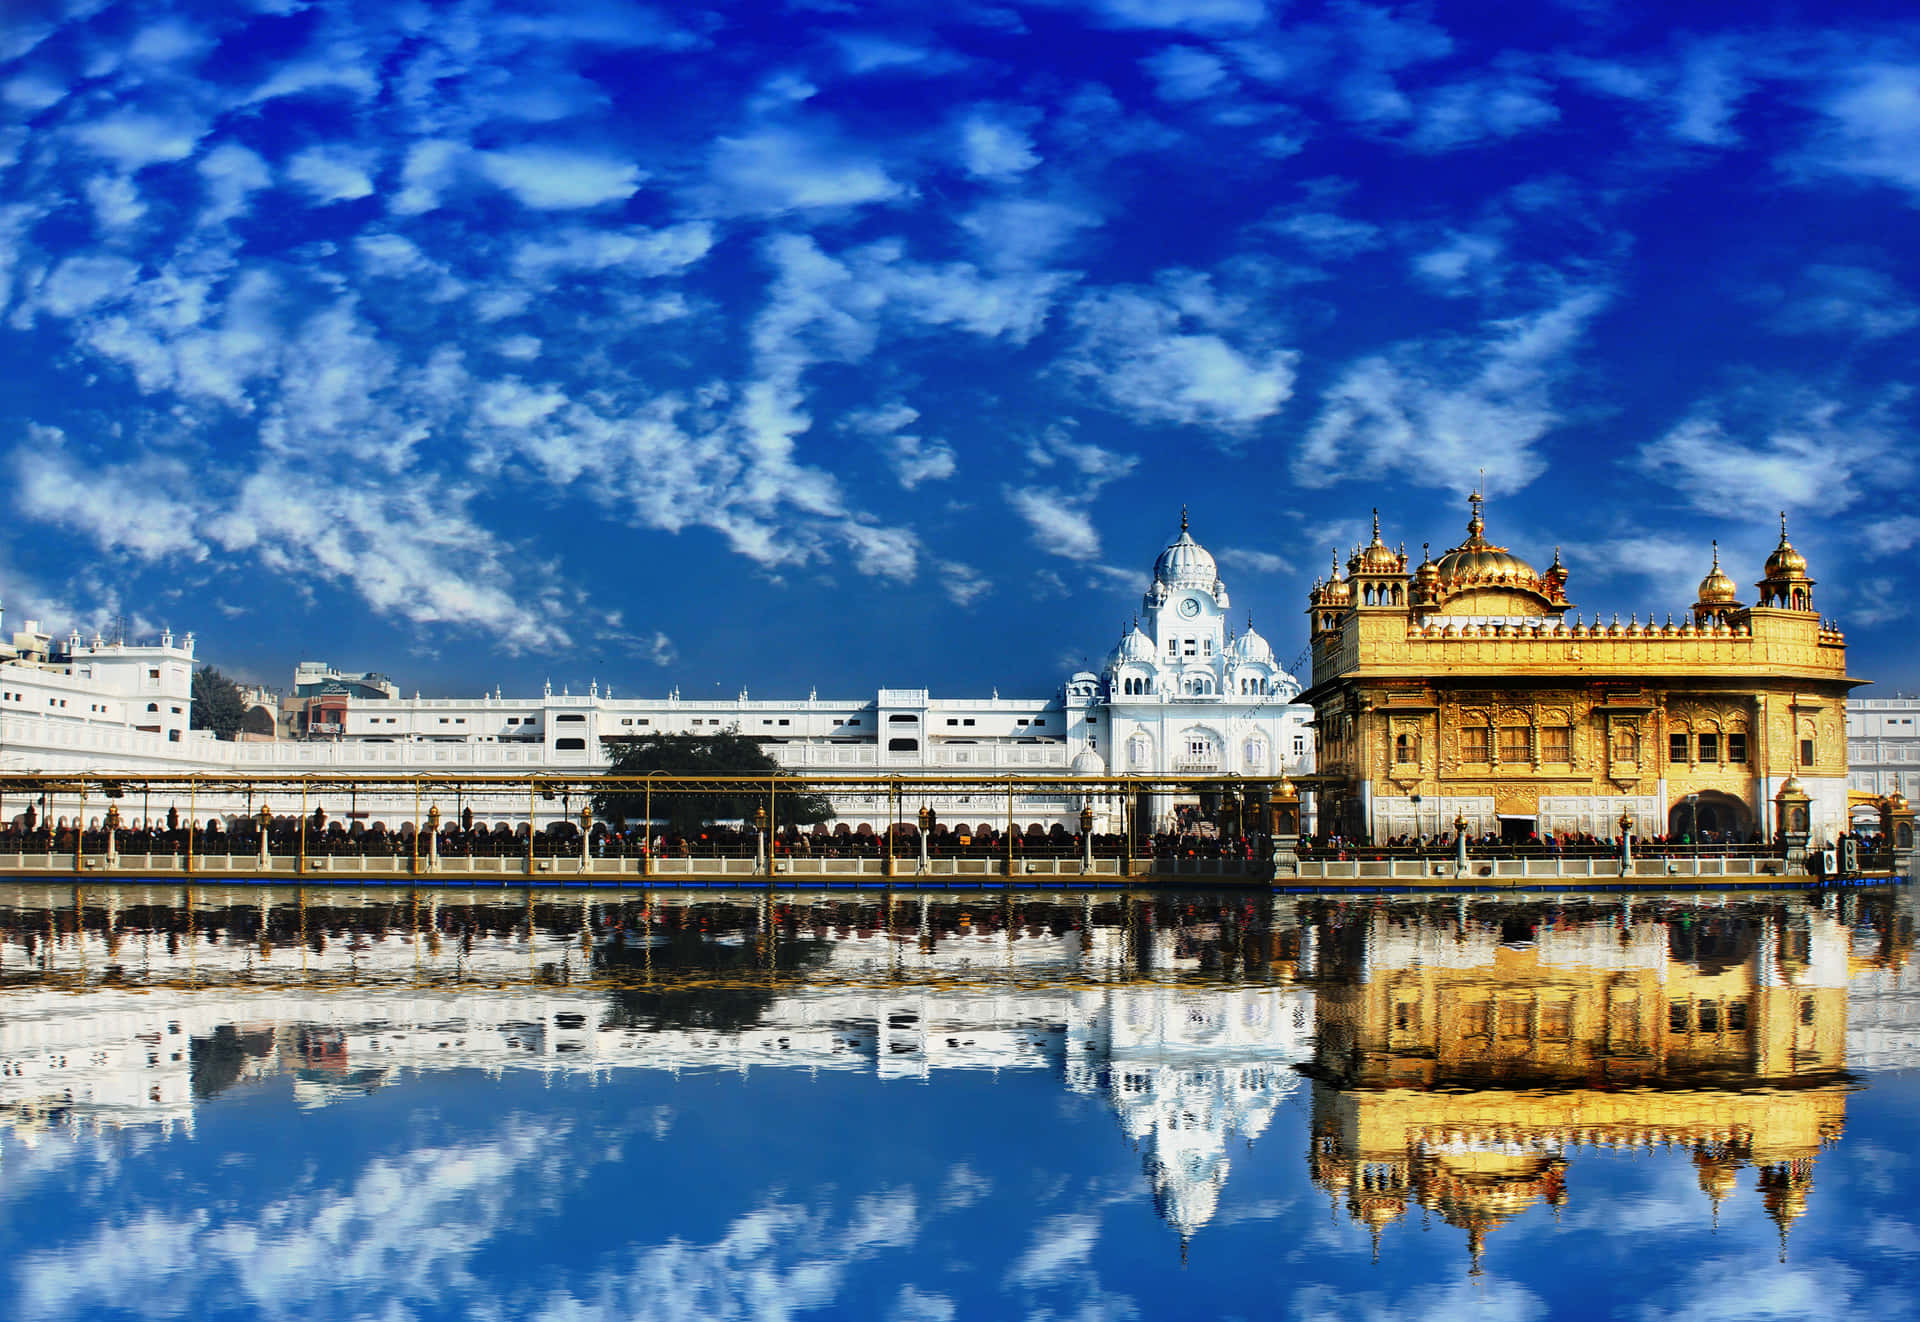 Free Golden Temple Wallpaper Downloads, [100+] Golden Temple Wallpapers for  FREE 